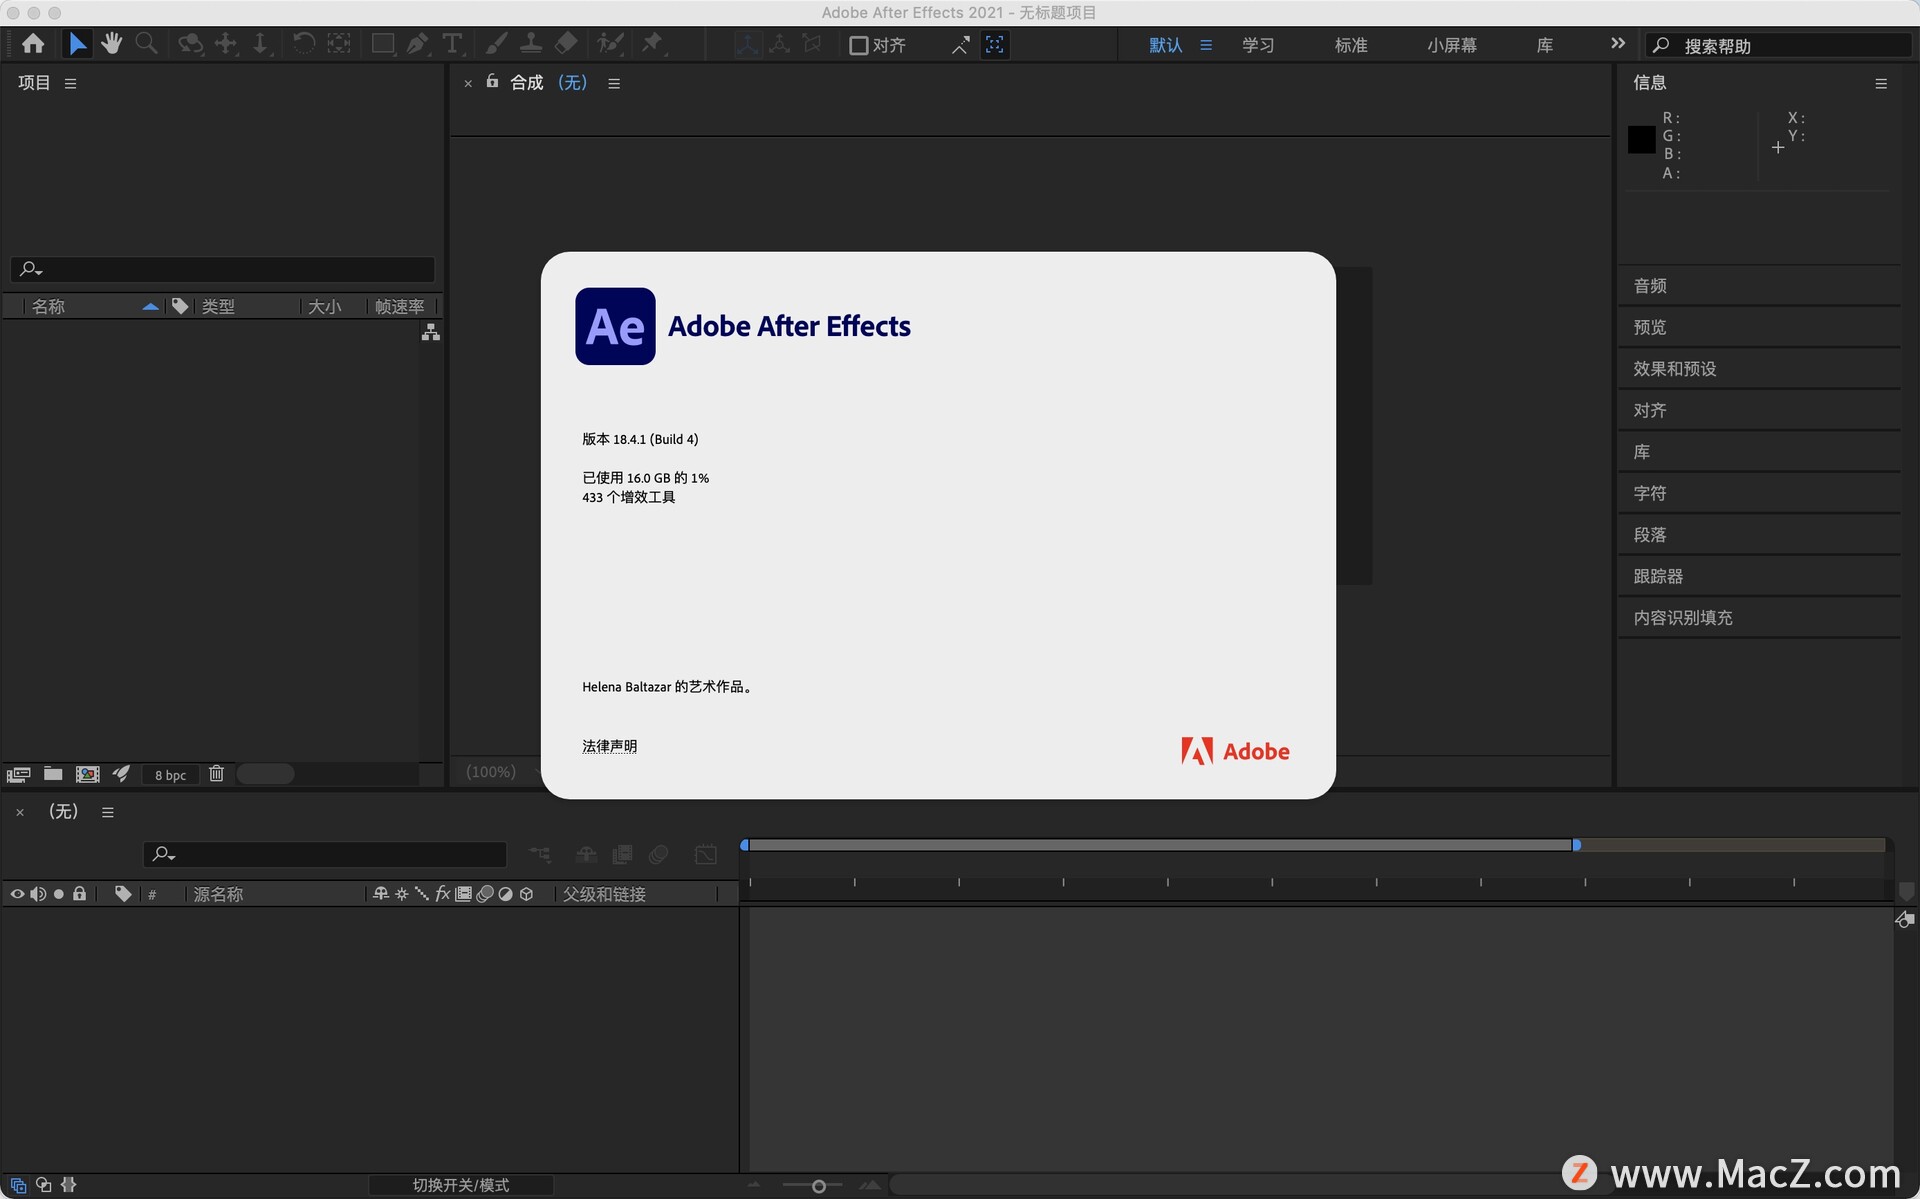 After Effects 2021 for Mac ae 中文激活版 - 图1